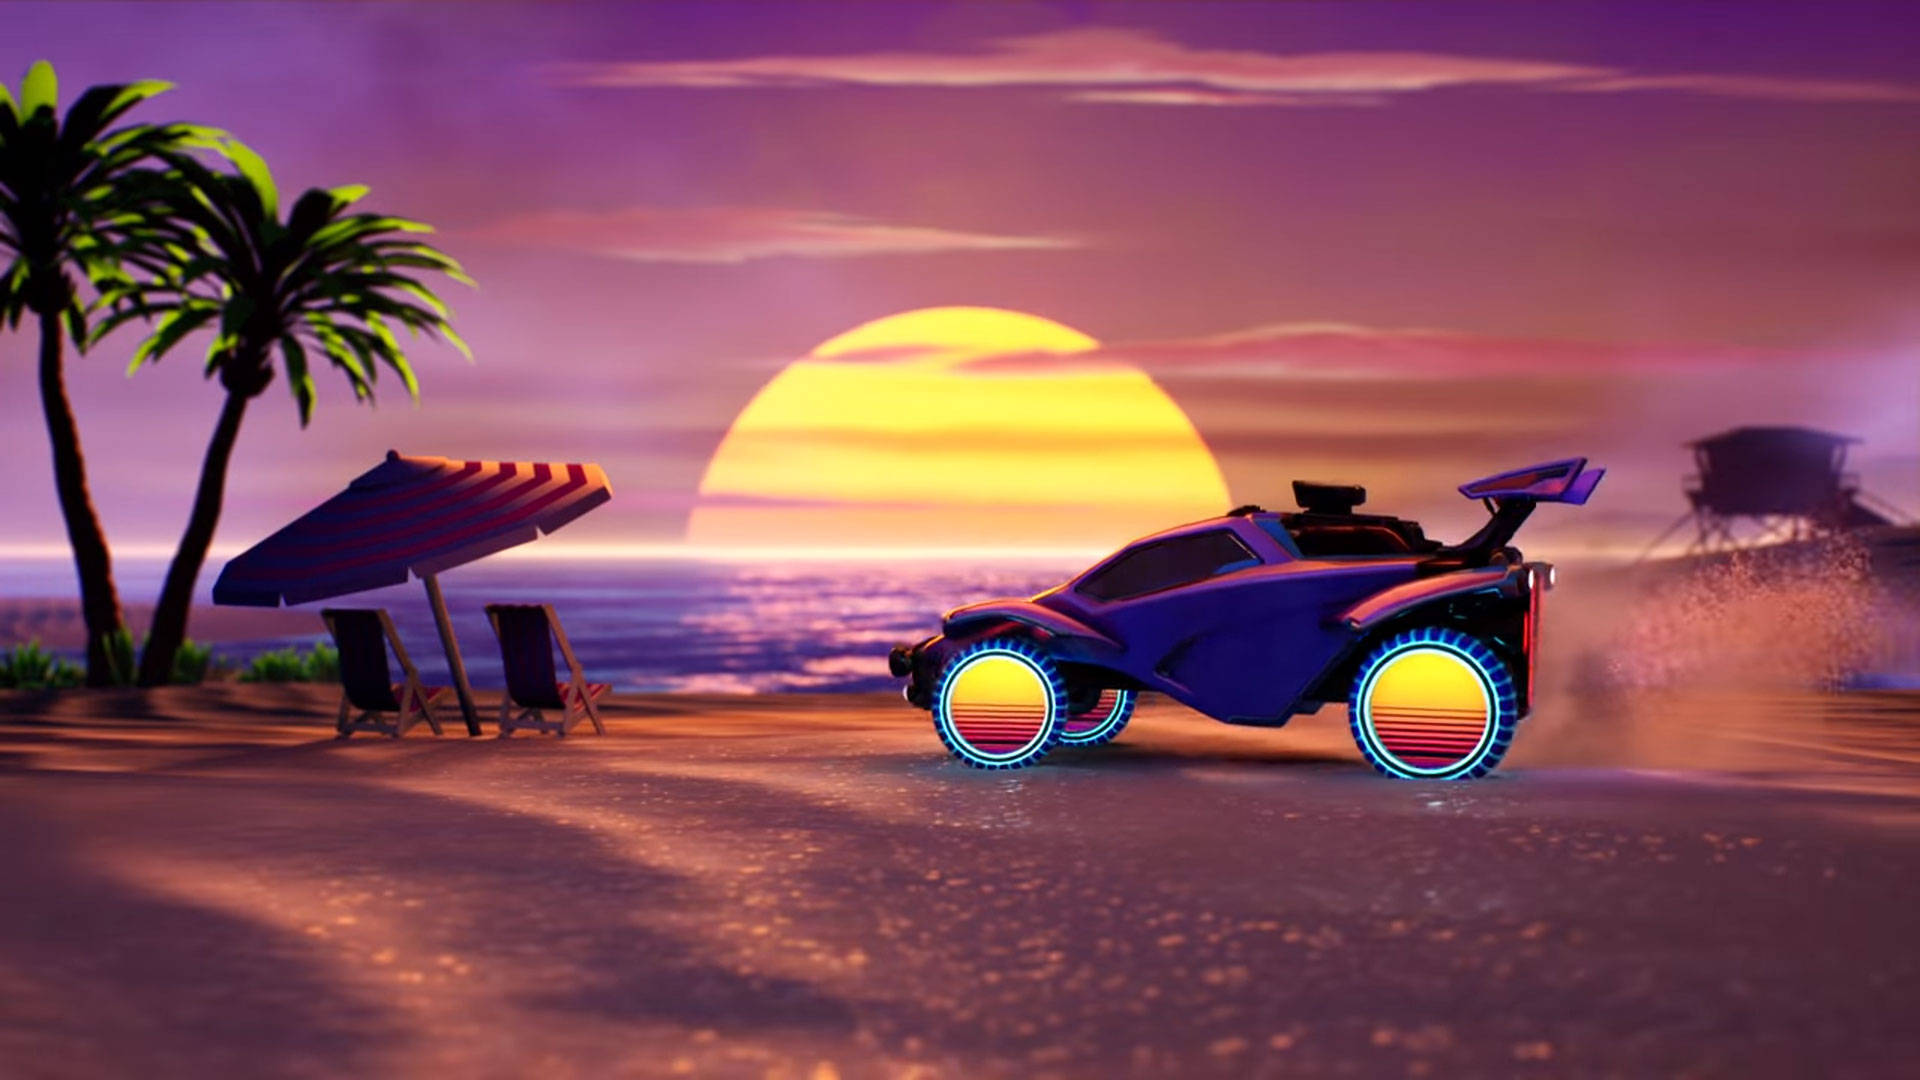 Enjoying A Day At The Beach With A Rocket League Car Wallpaper